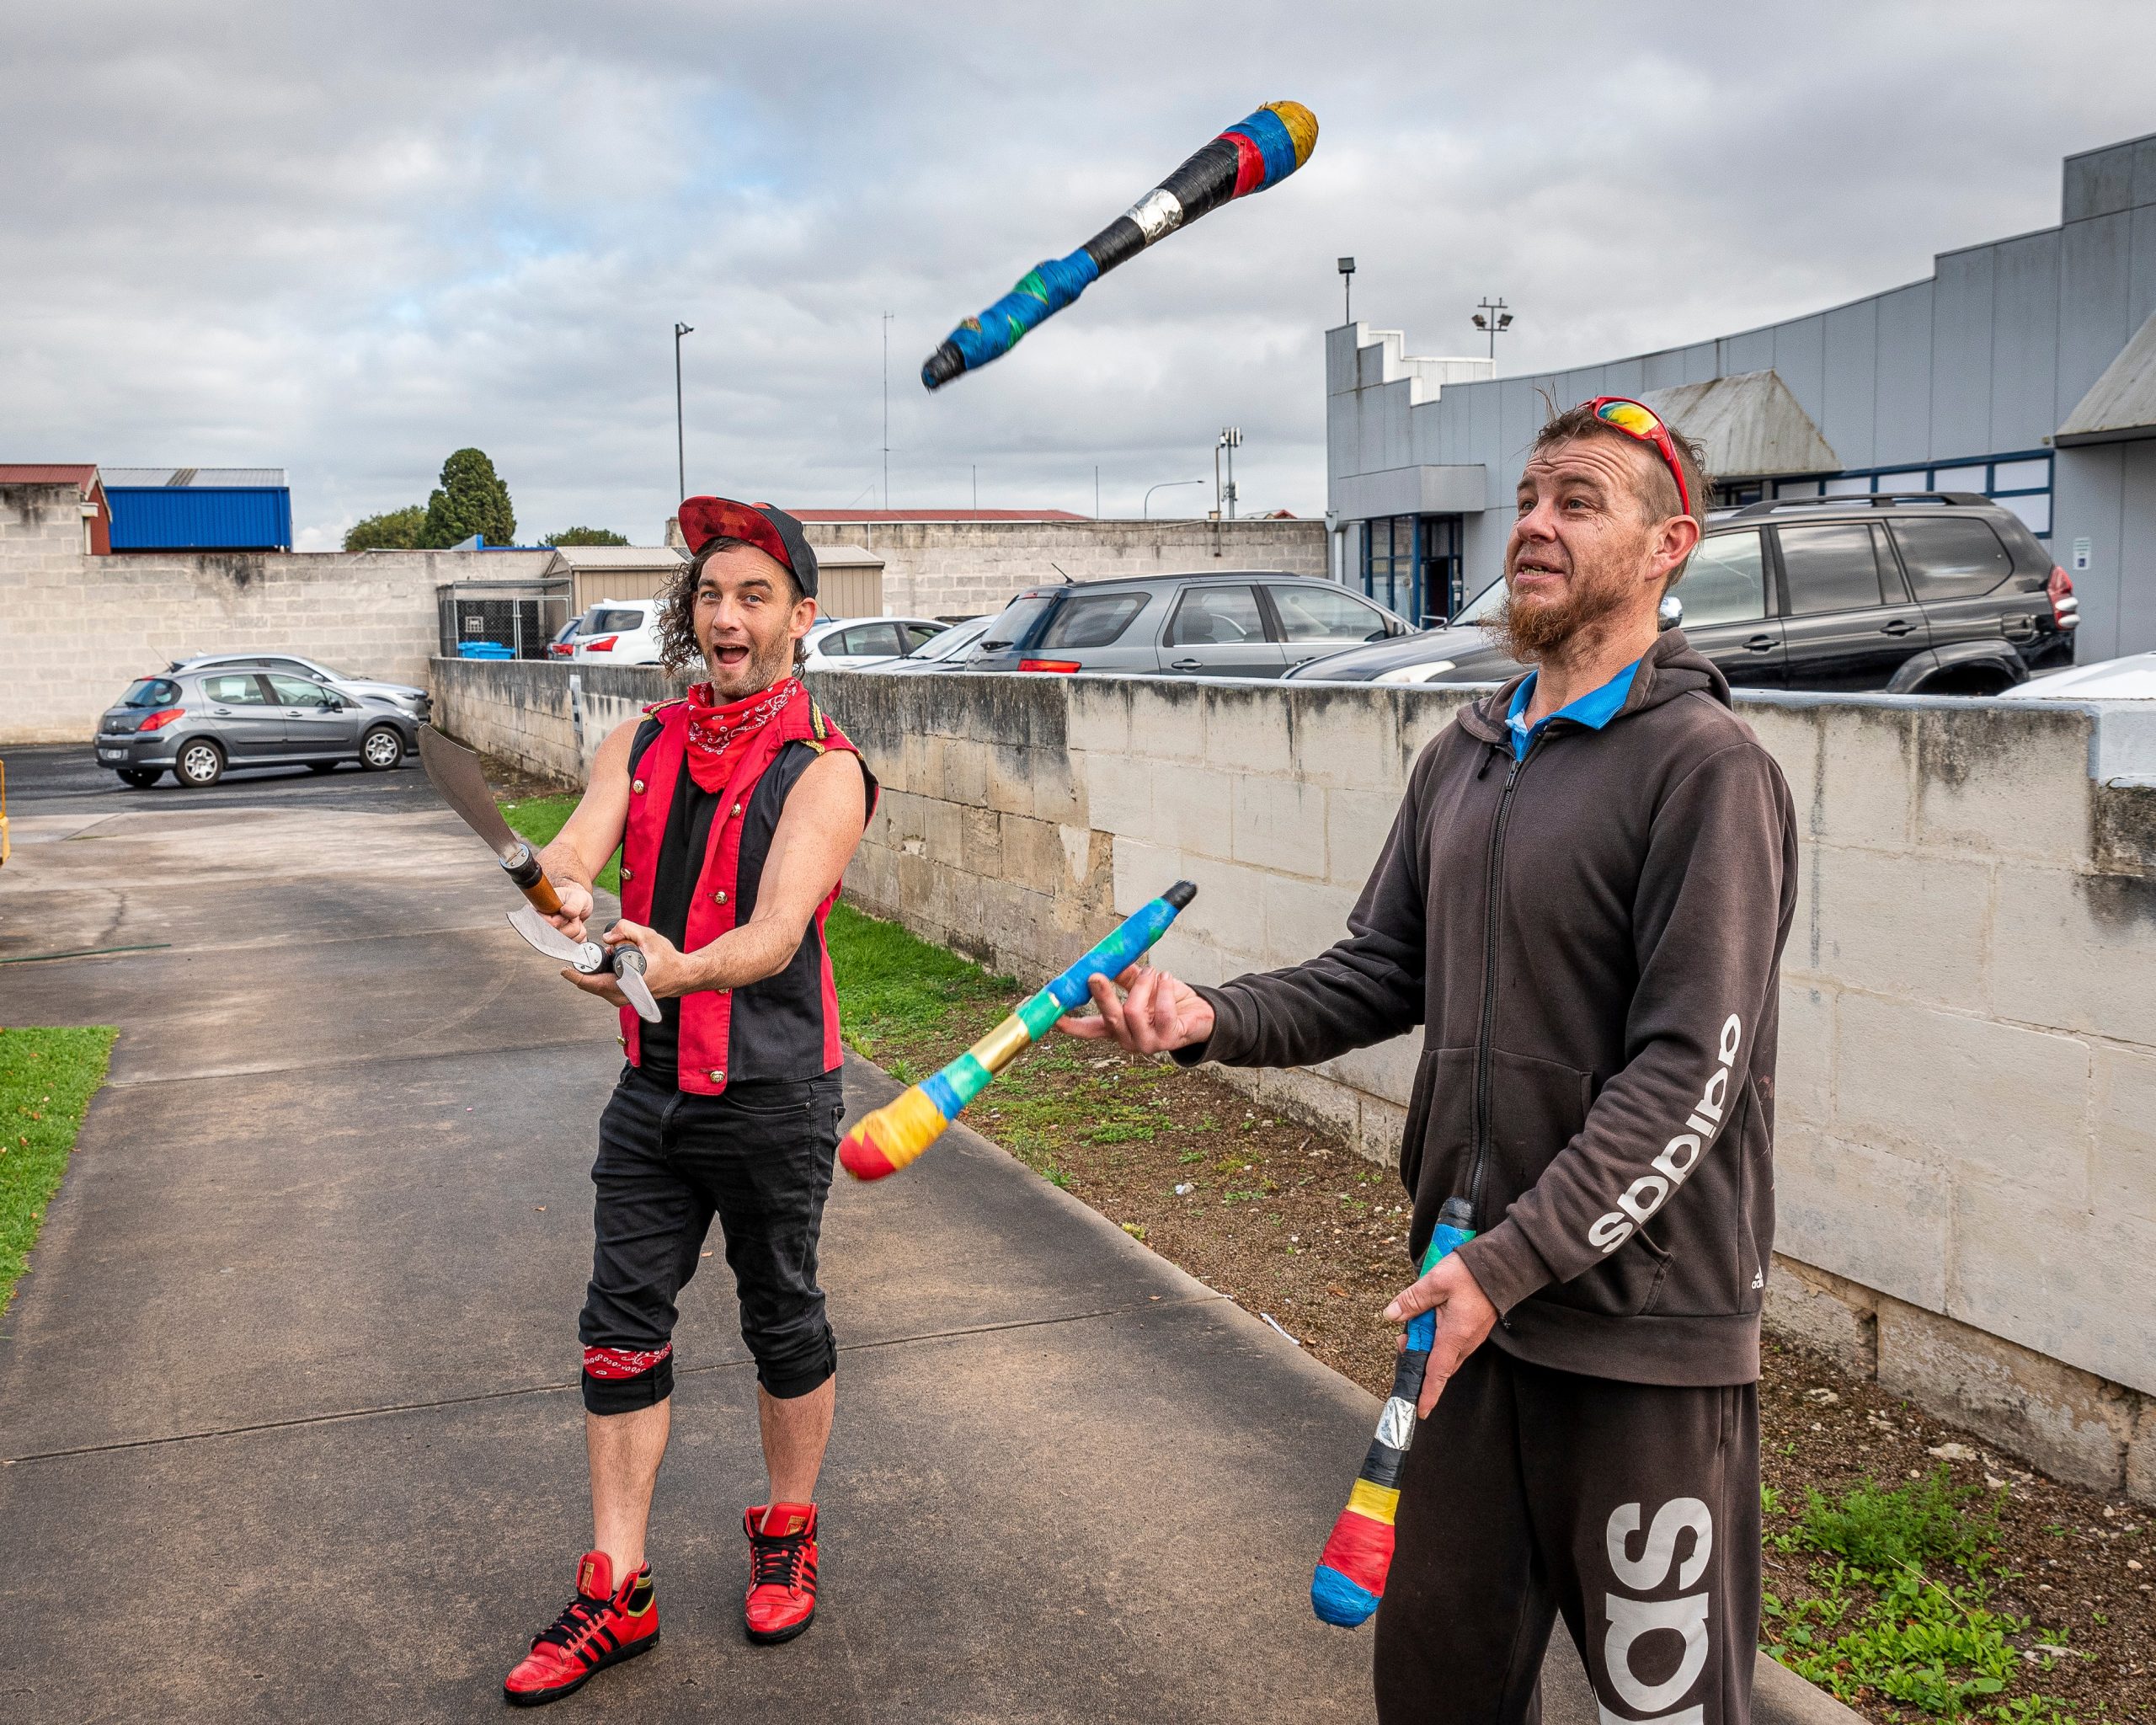 SHARING TALENT: Friend of ac.care Damien was inspired by Fringe performer Mat E Tricks to share some of his own juggling and circus skills. Picture: TIM ROSENTHAL